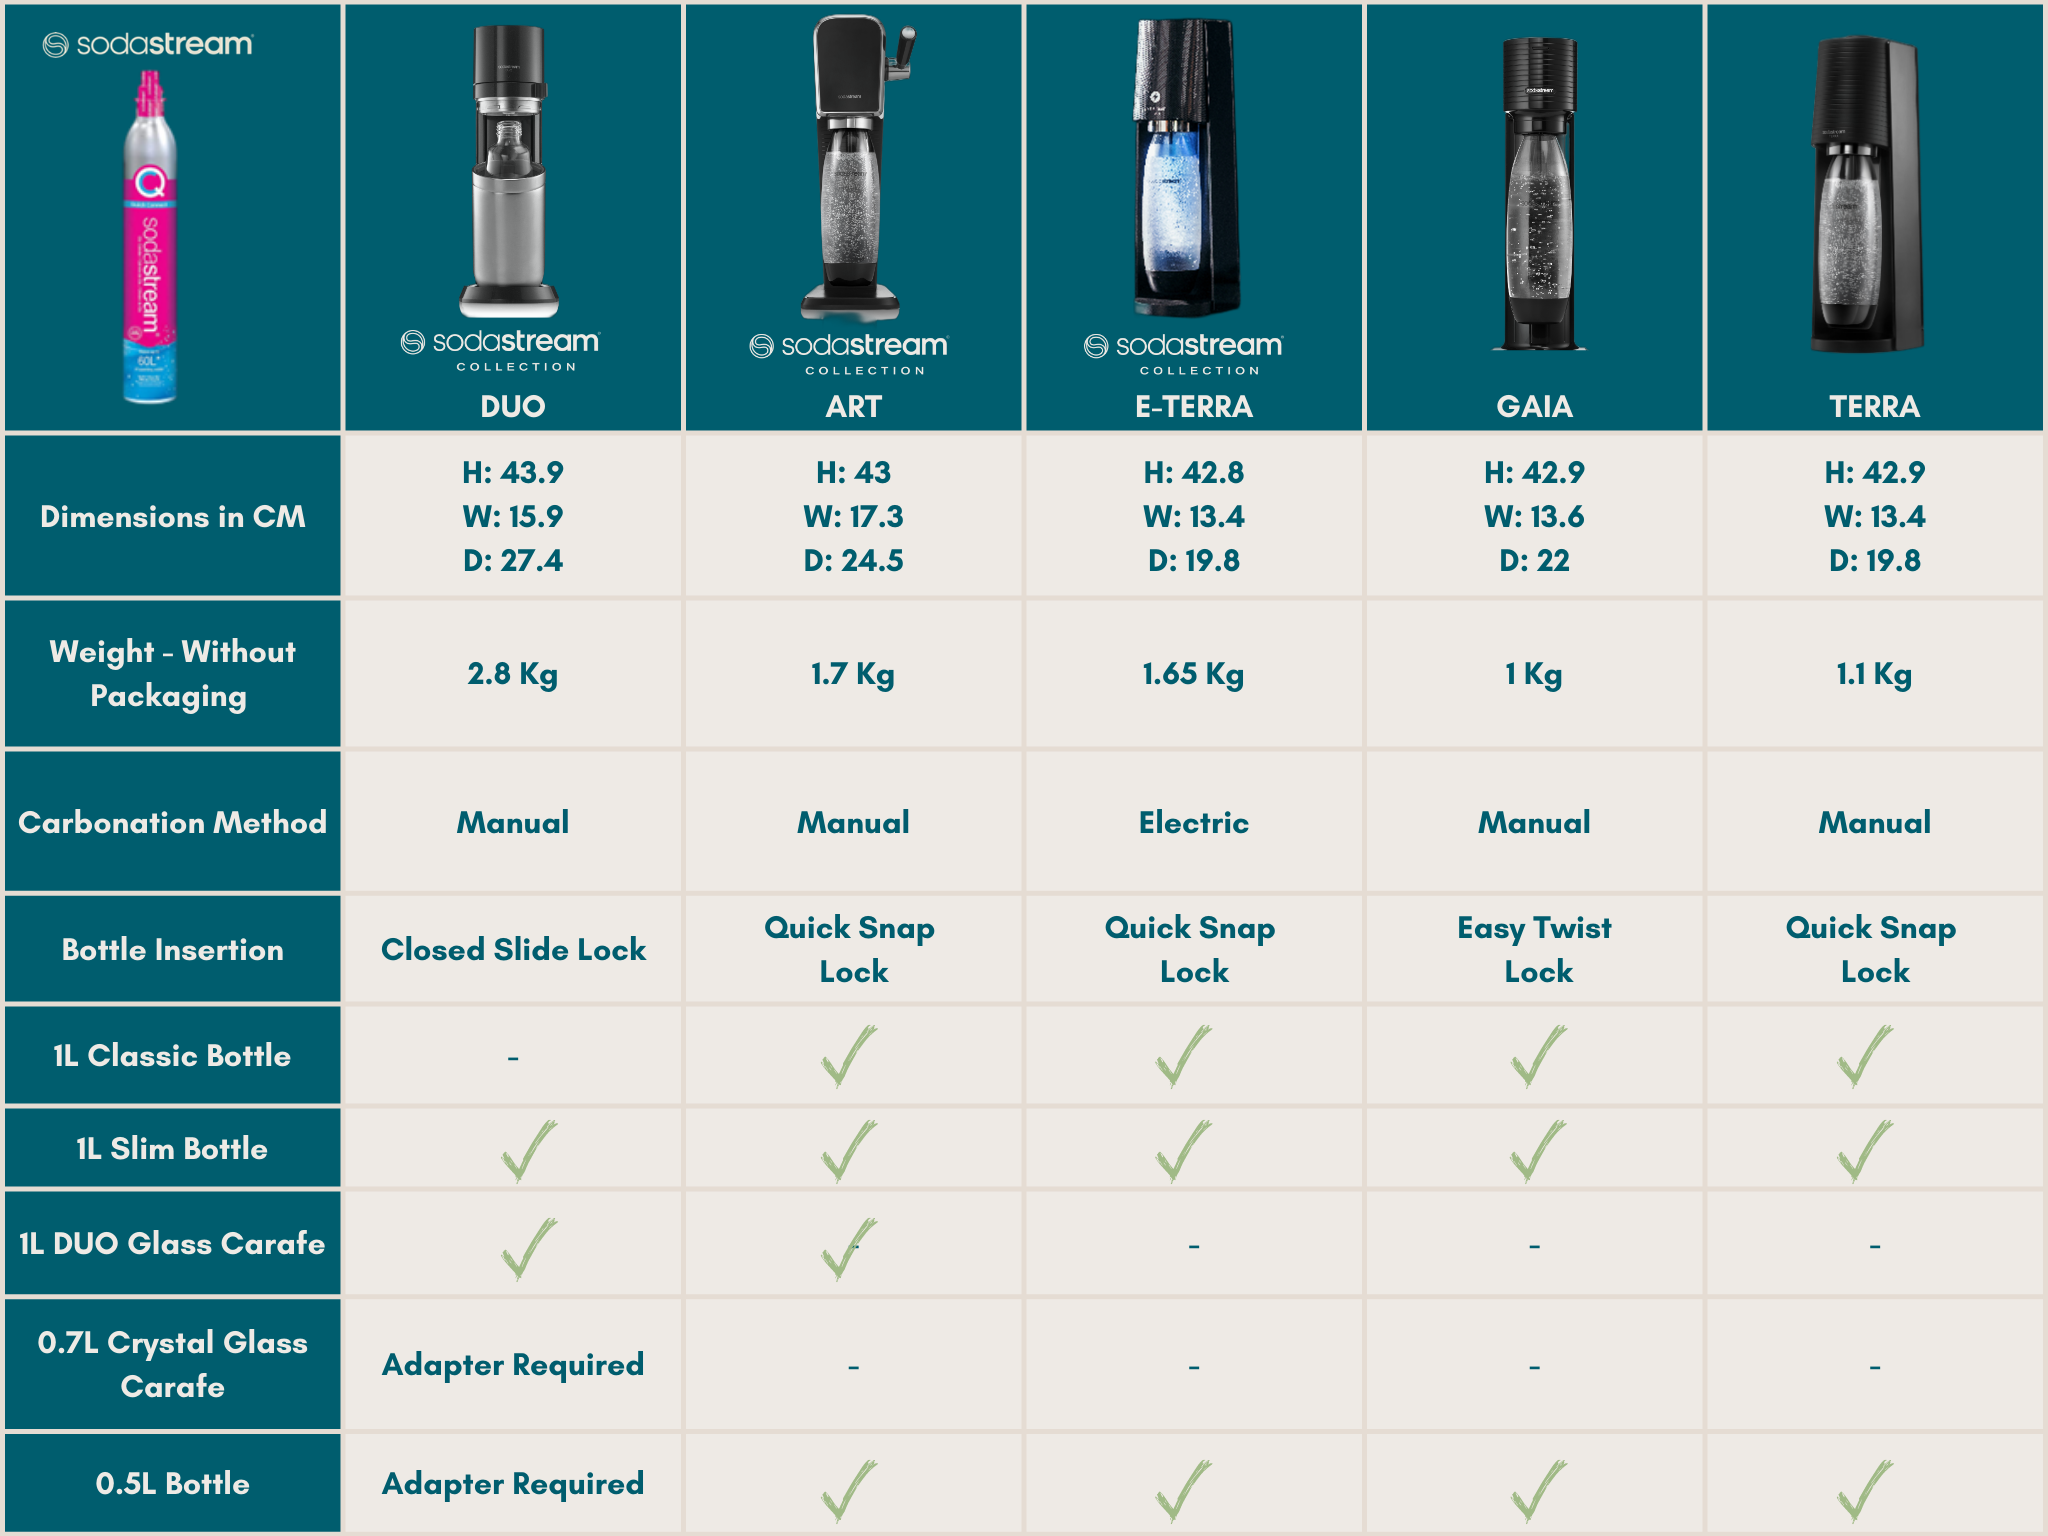 Are existing products (bottles, cylinders) compatible with the